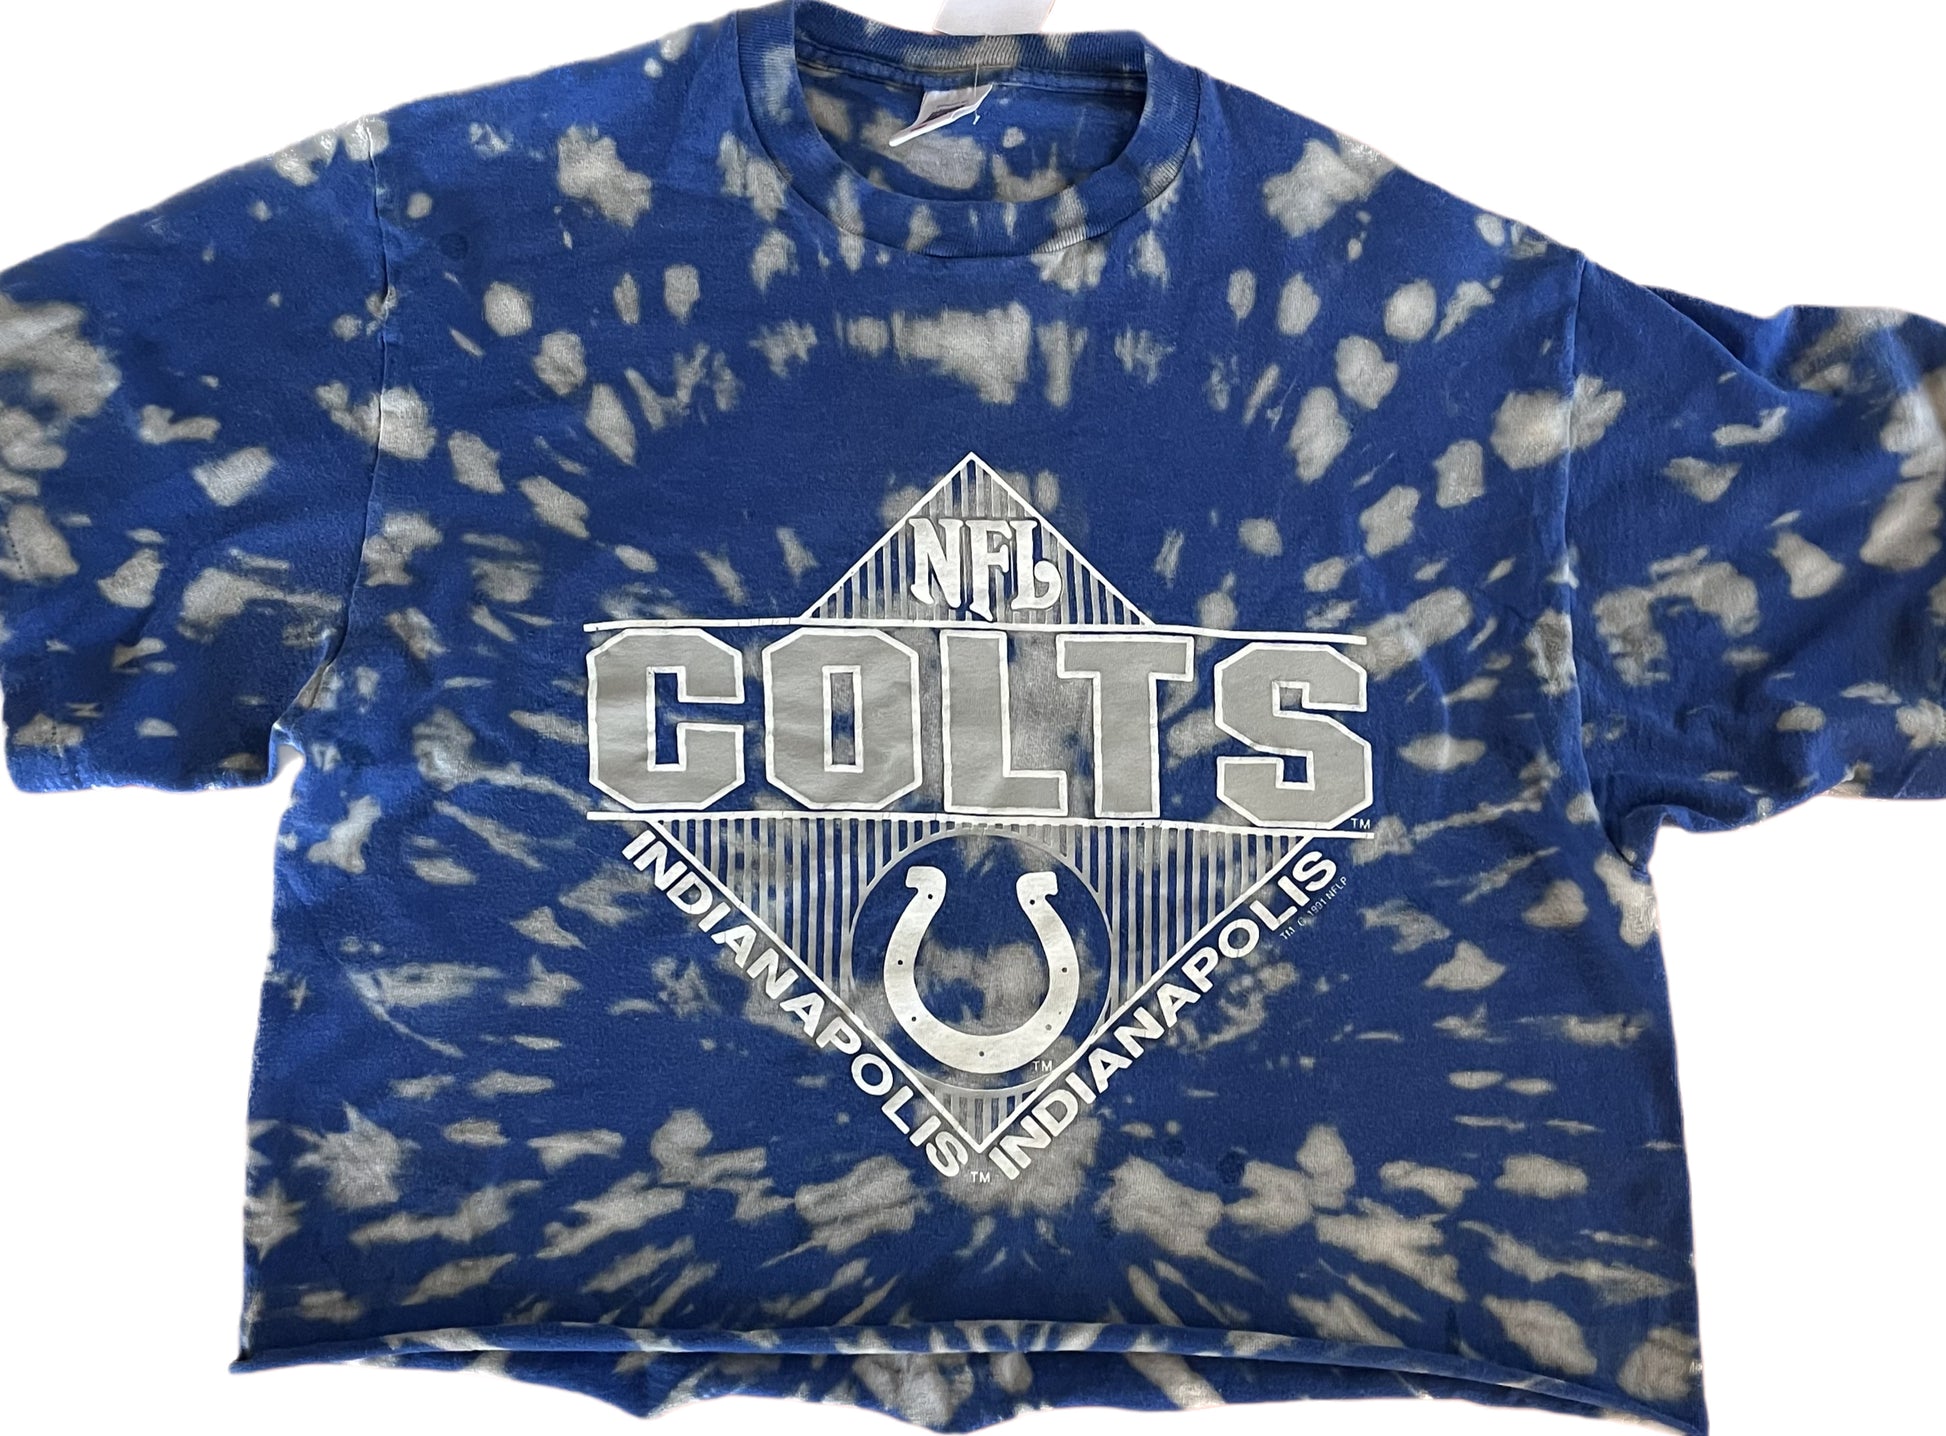 vintage indianapolis colts tee shirt football nfl for women